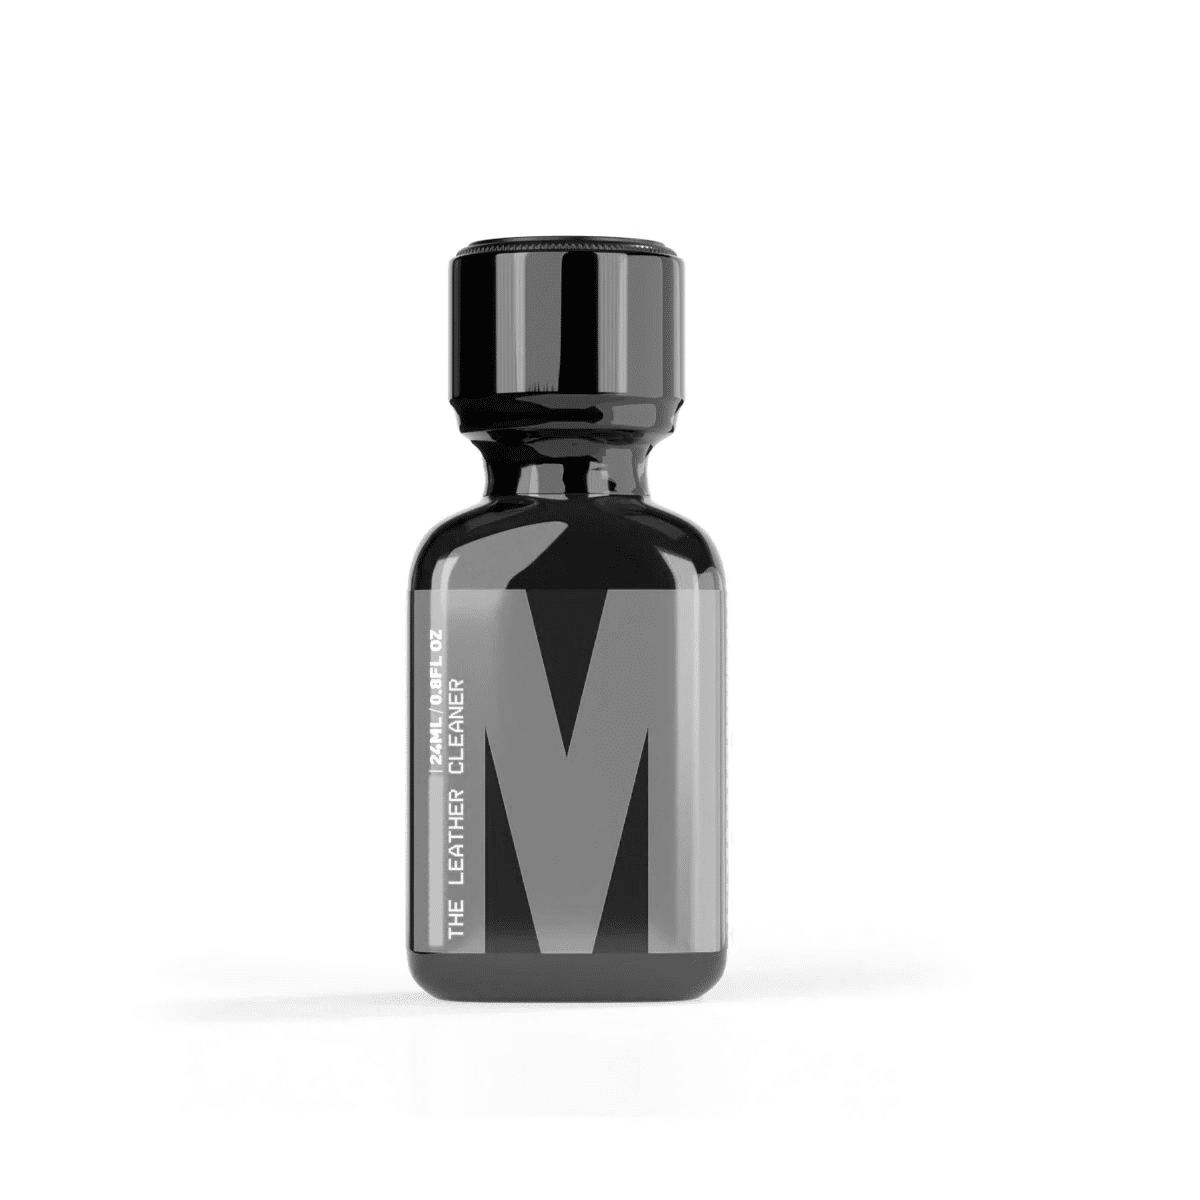 A sleek bottle with modern minimalist design featuring a bold letter 'M' on the label, ideal for M The Leather Cleaner Pentyl.